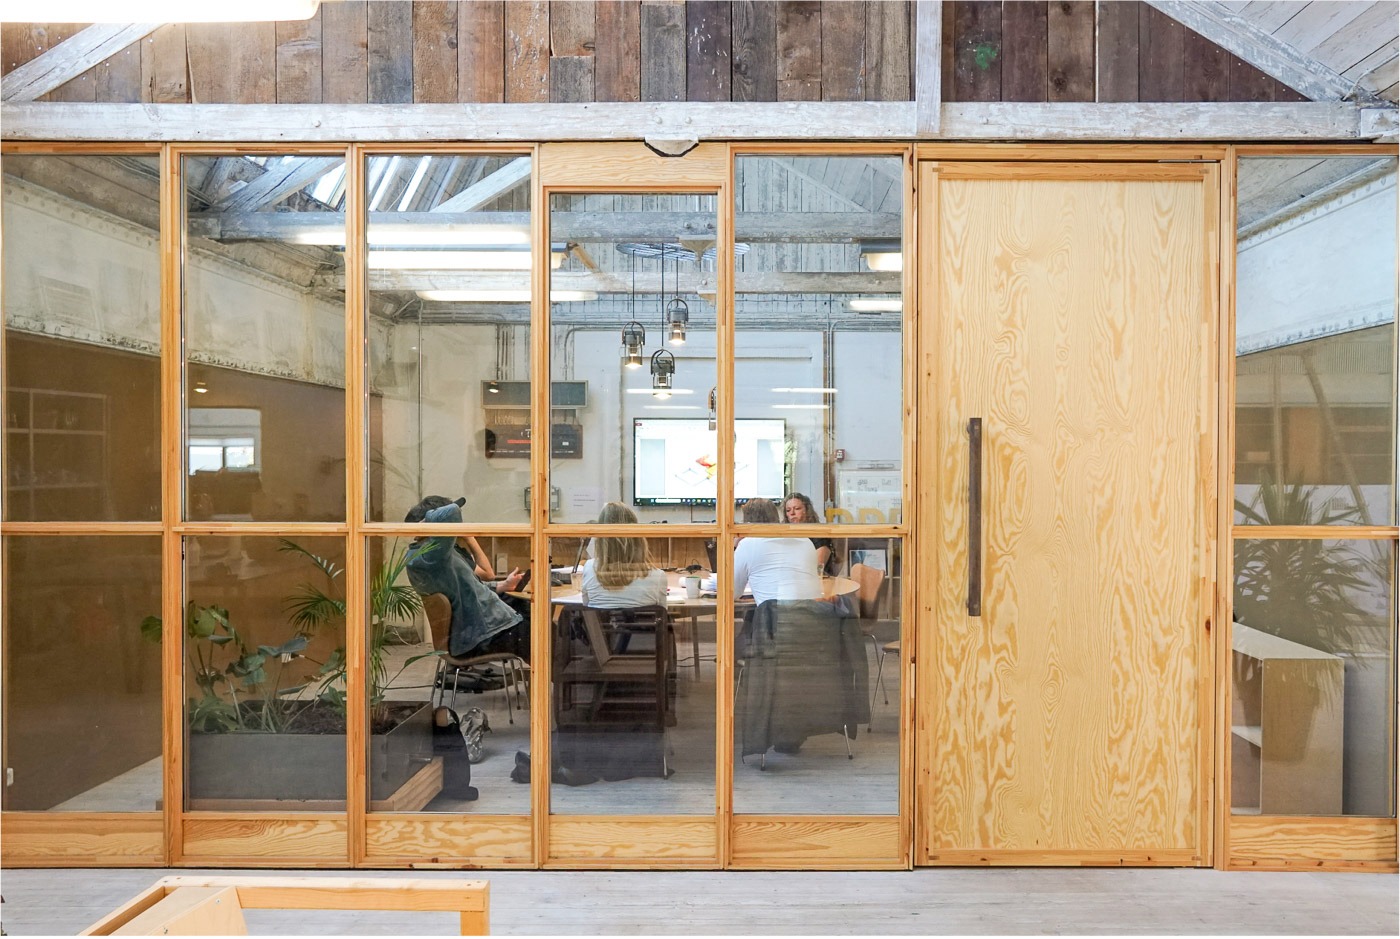 The partitioning system is made from upcycled wood